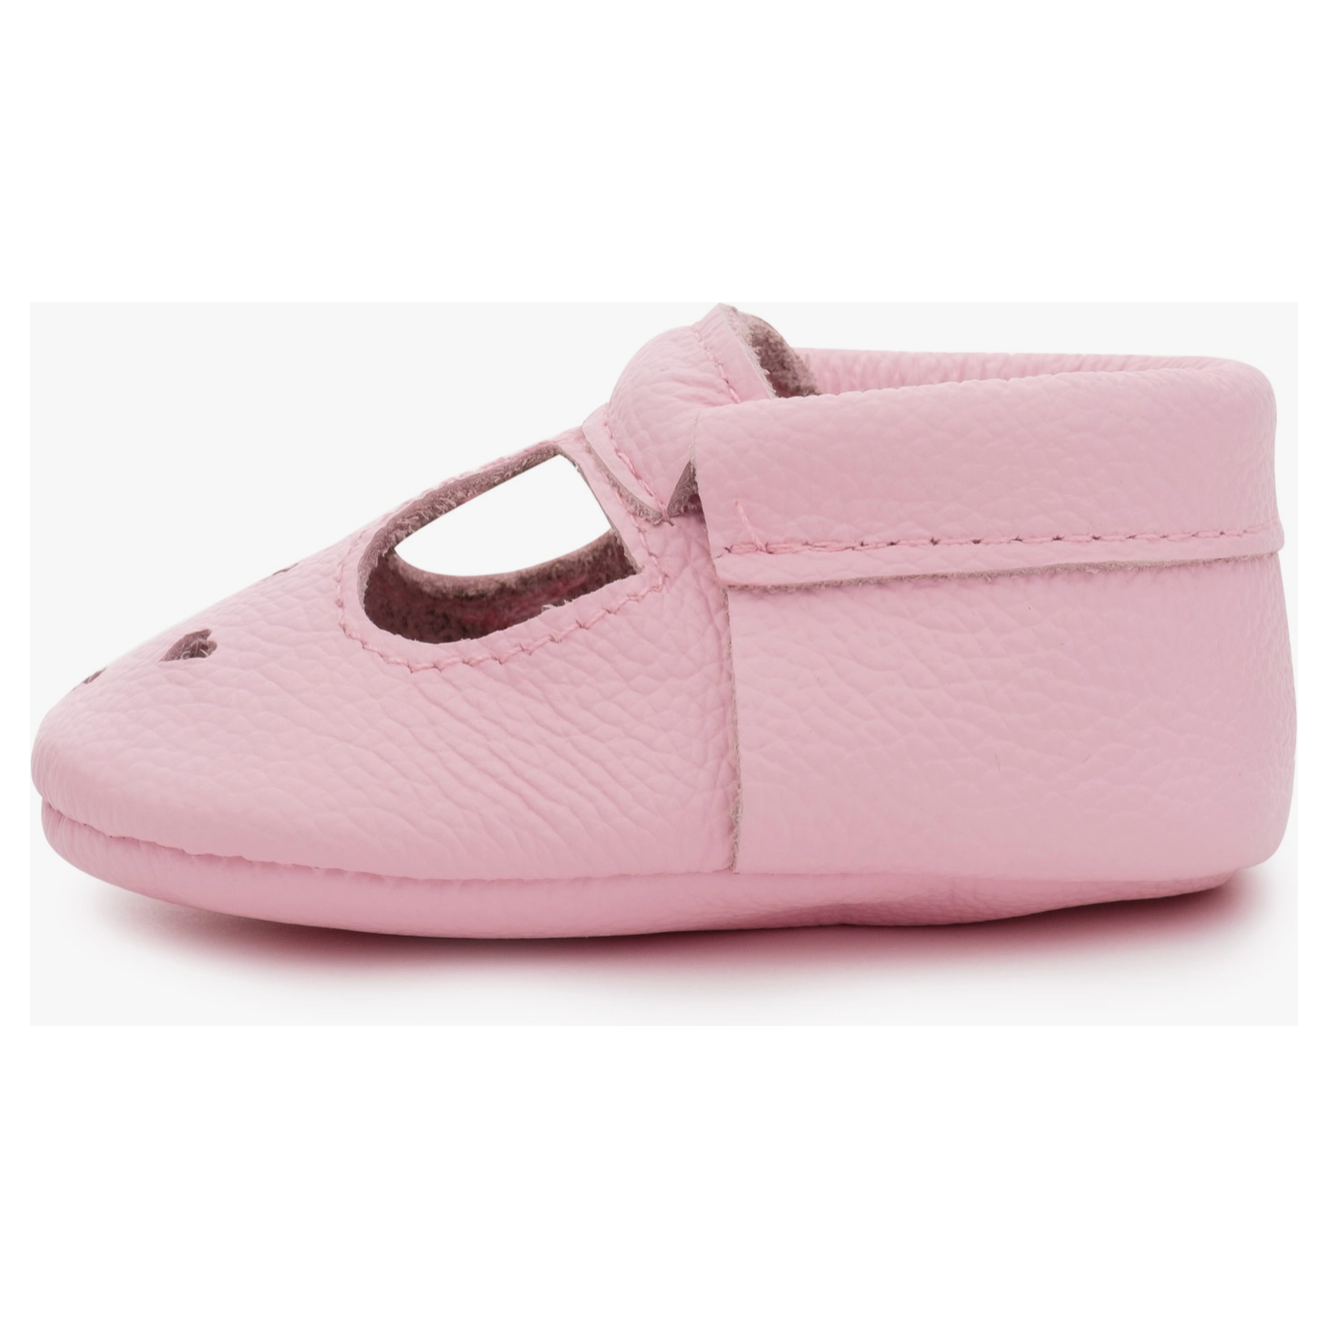 leather baby mary janes in pink